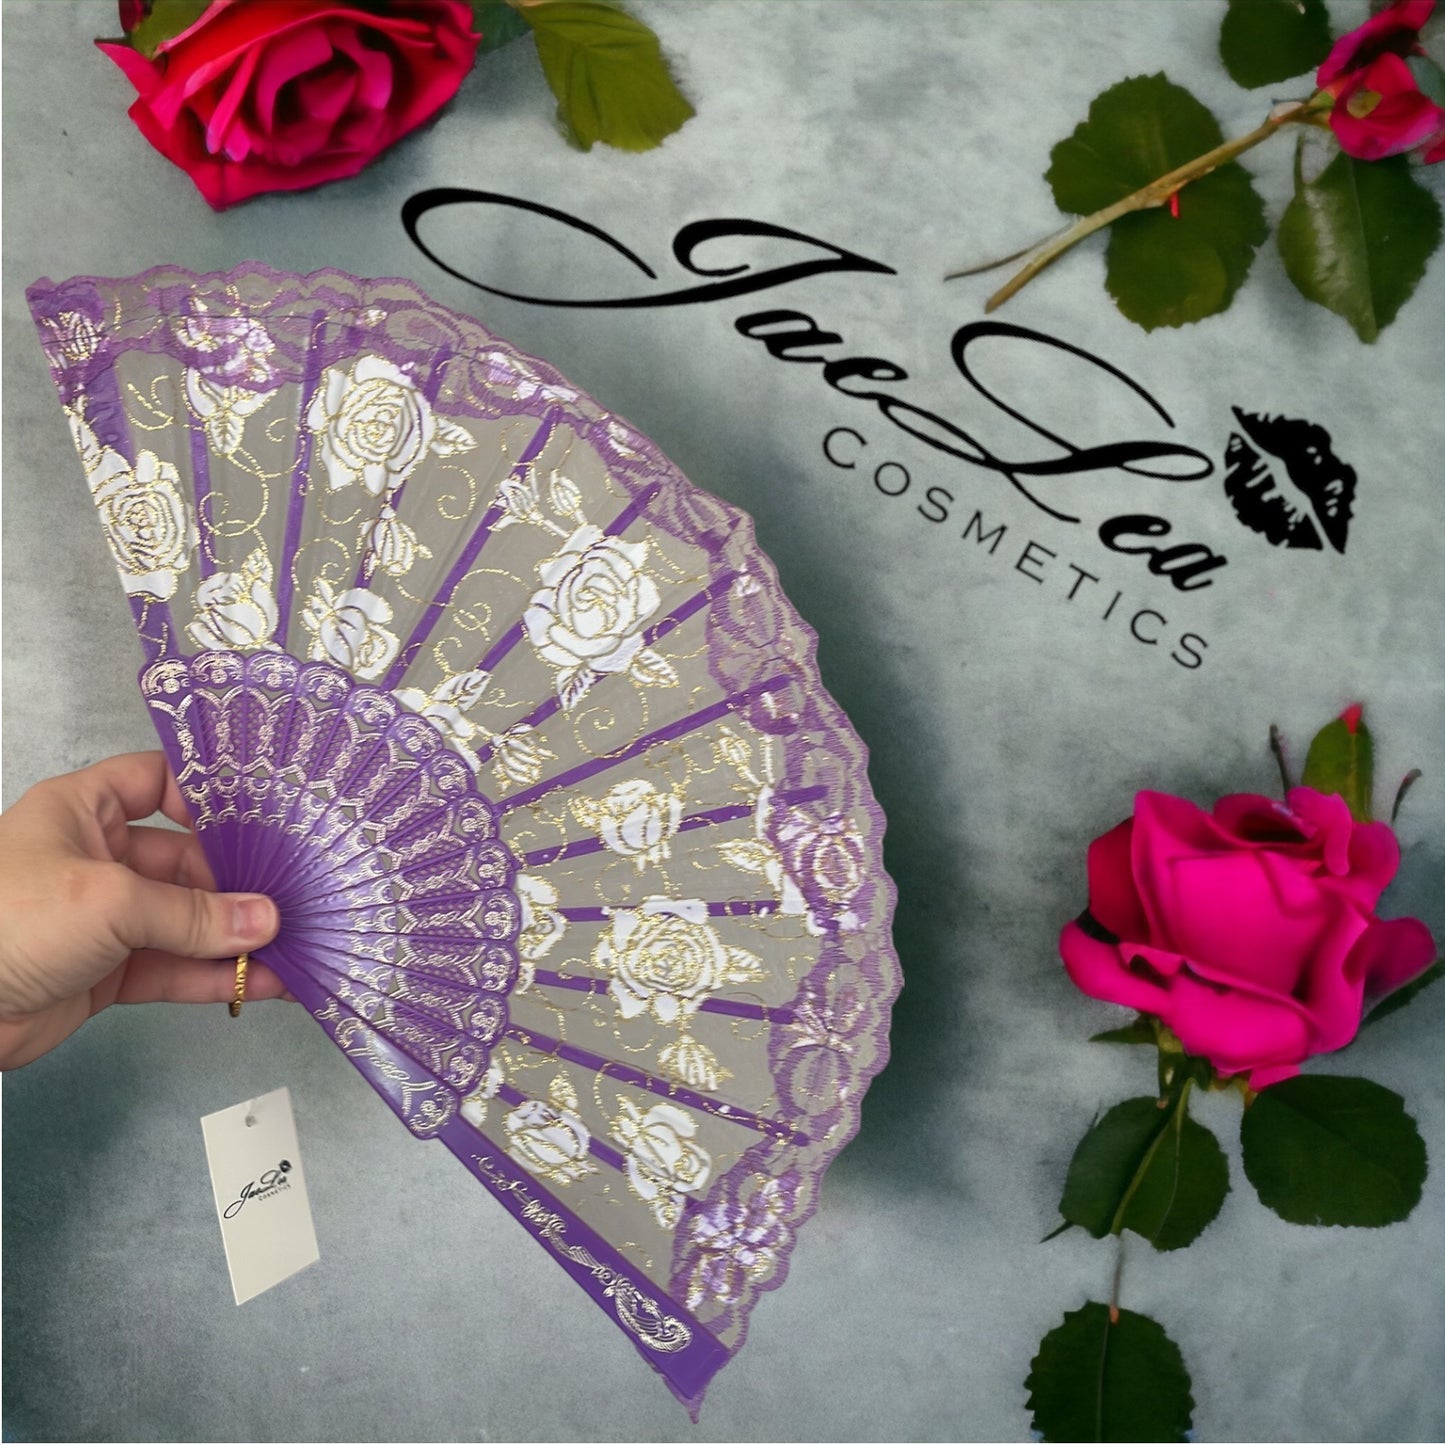 Rose embroidery lace fans